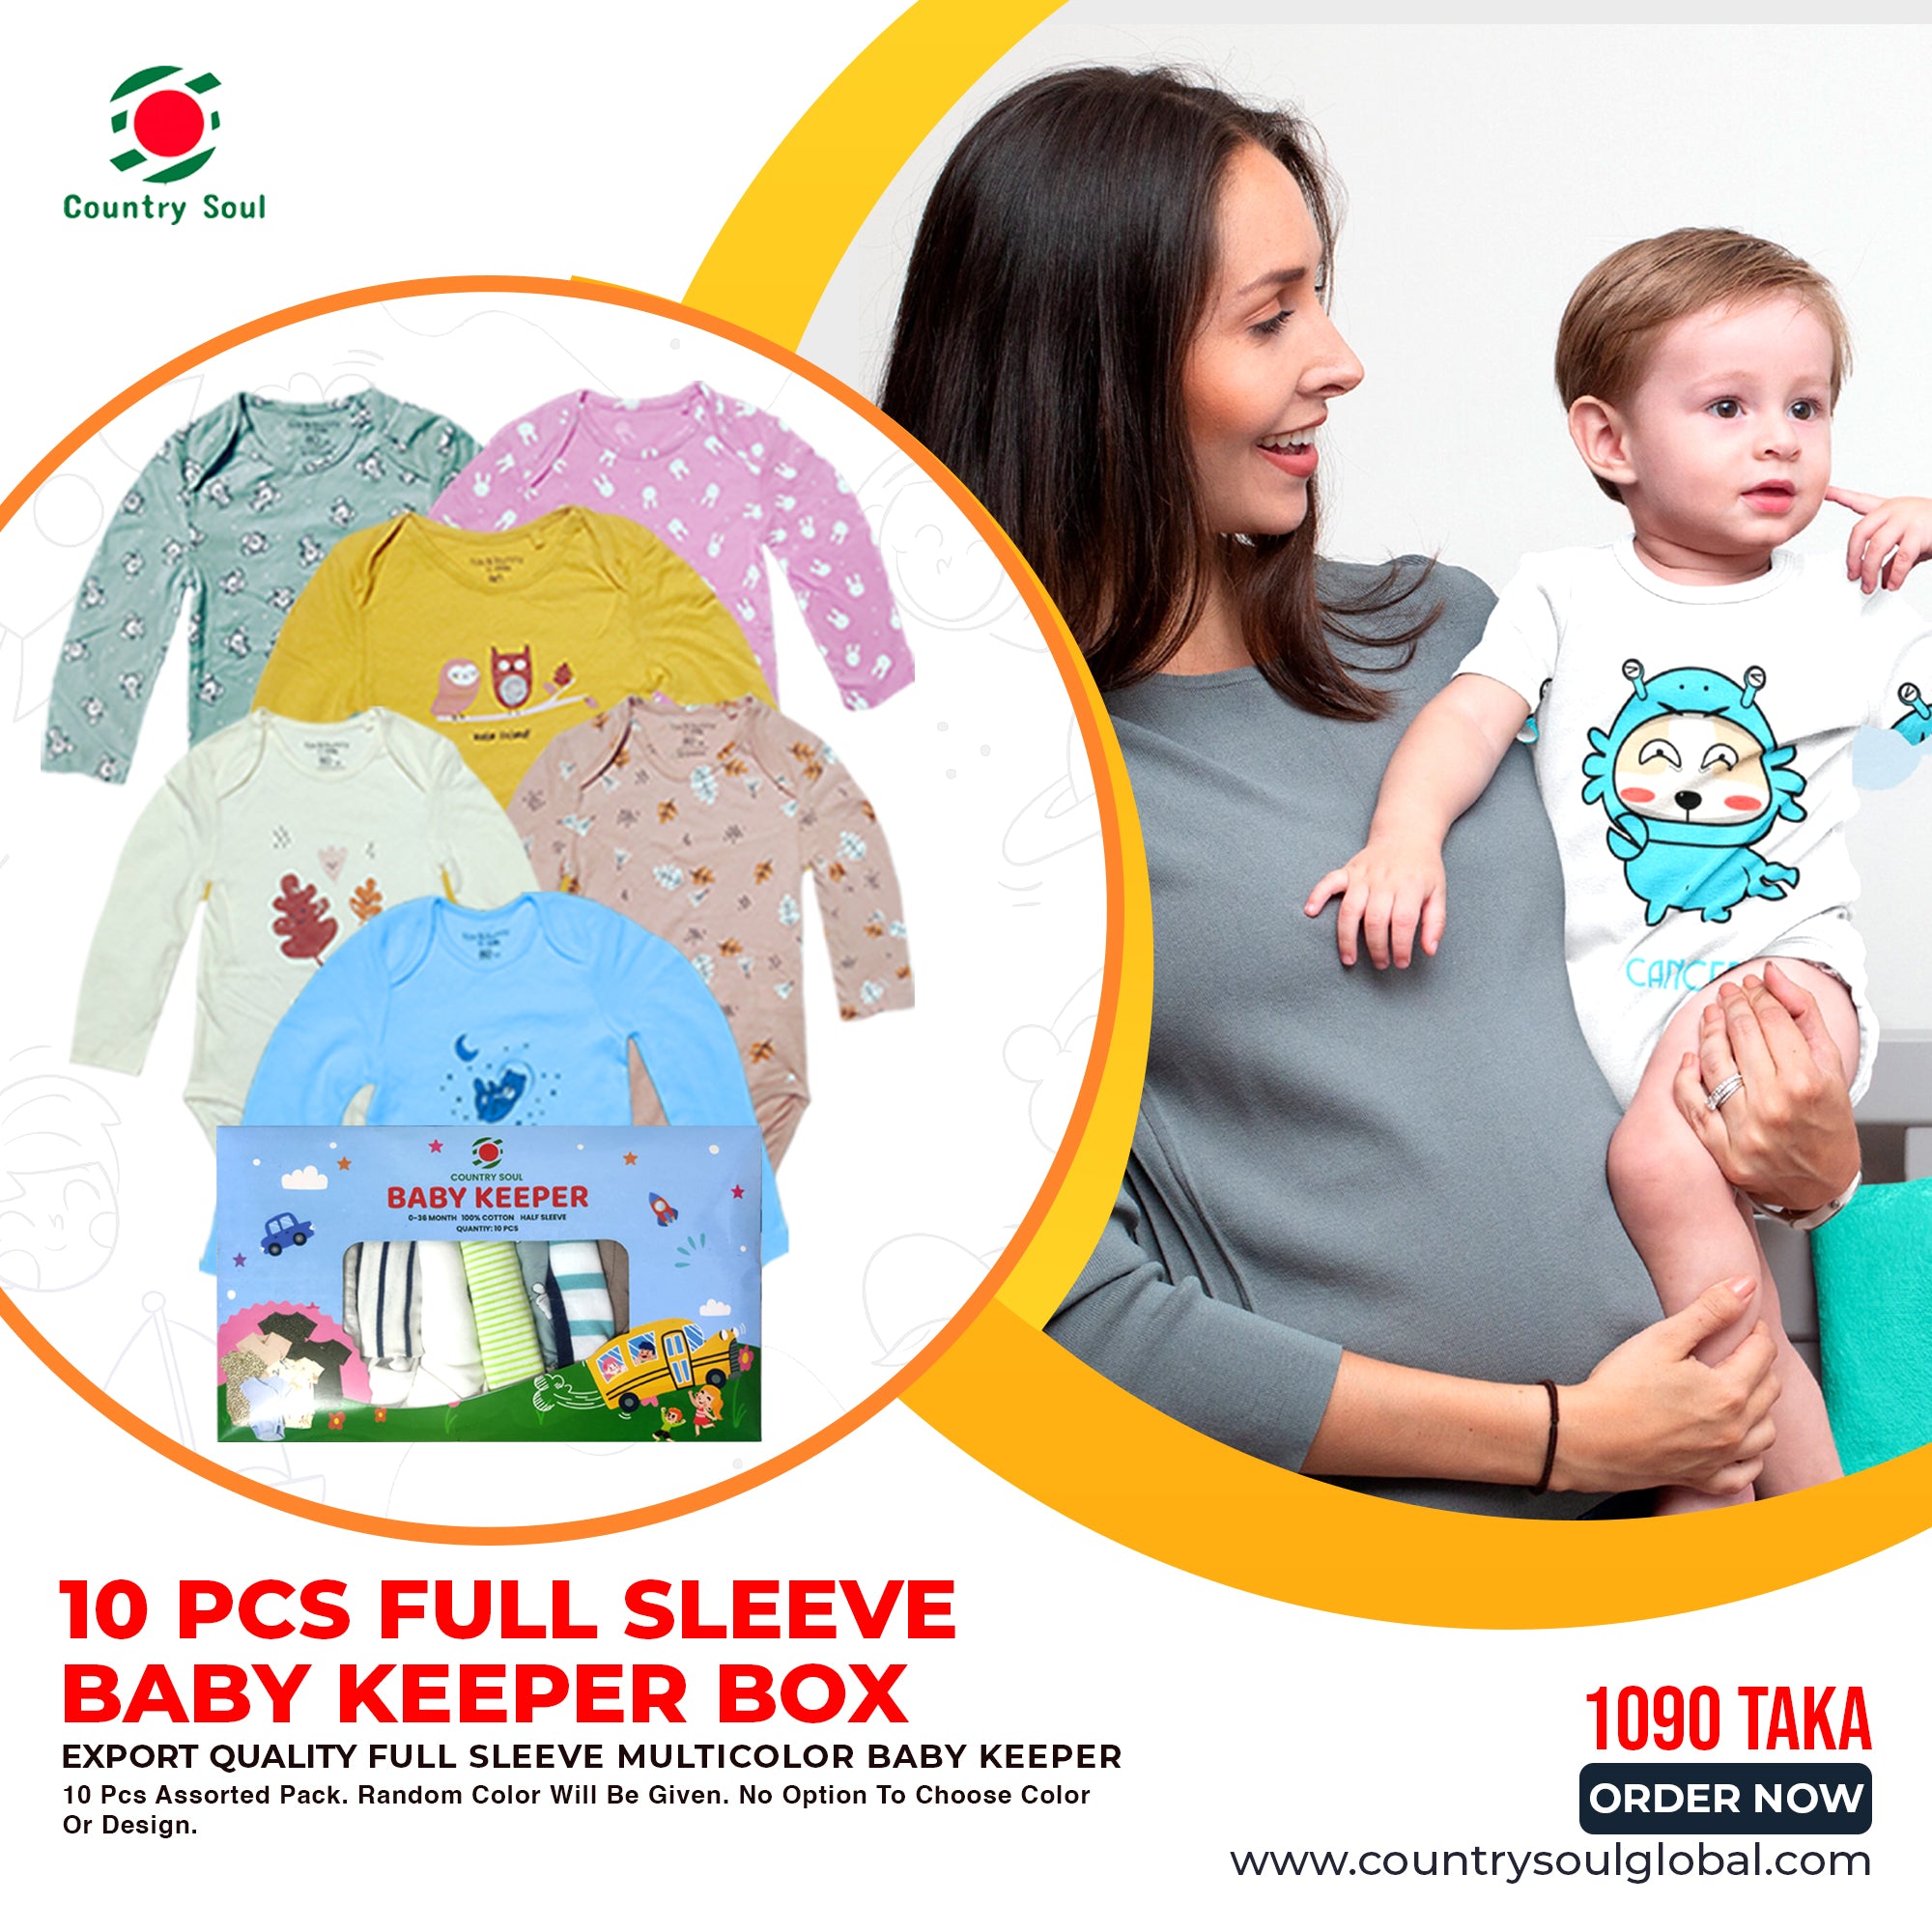 10 Pcs Full Sleeve Baby Keeper/Romper Combo Box for 0 to 36 month